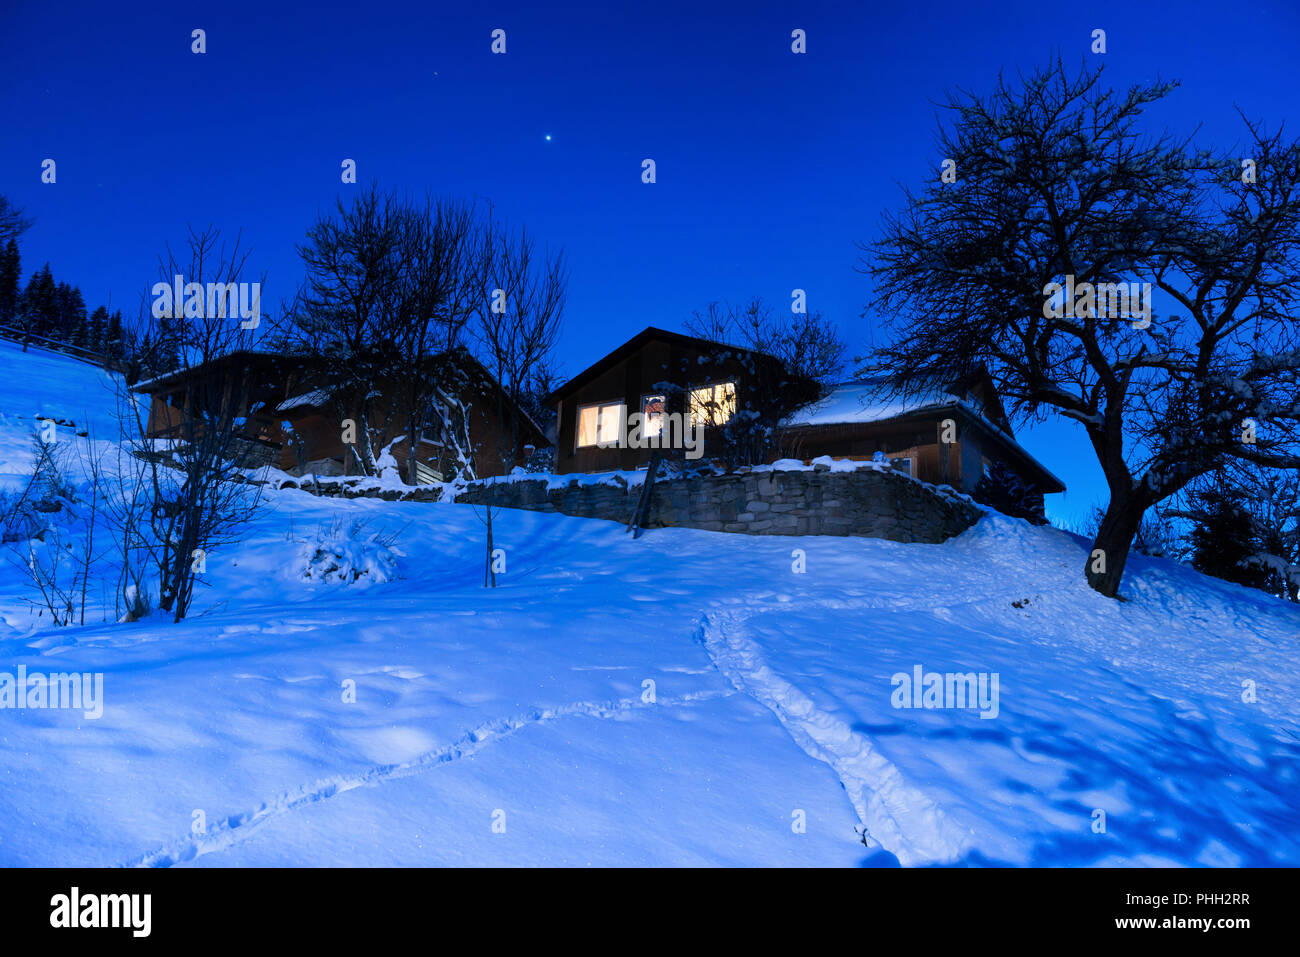 Wooden house in snow at winter night Stock Photo